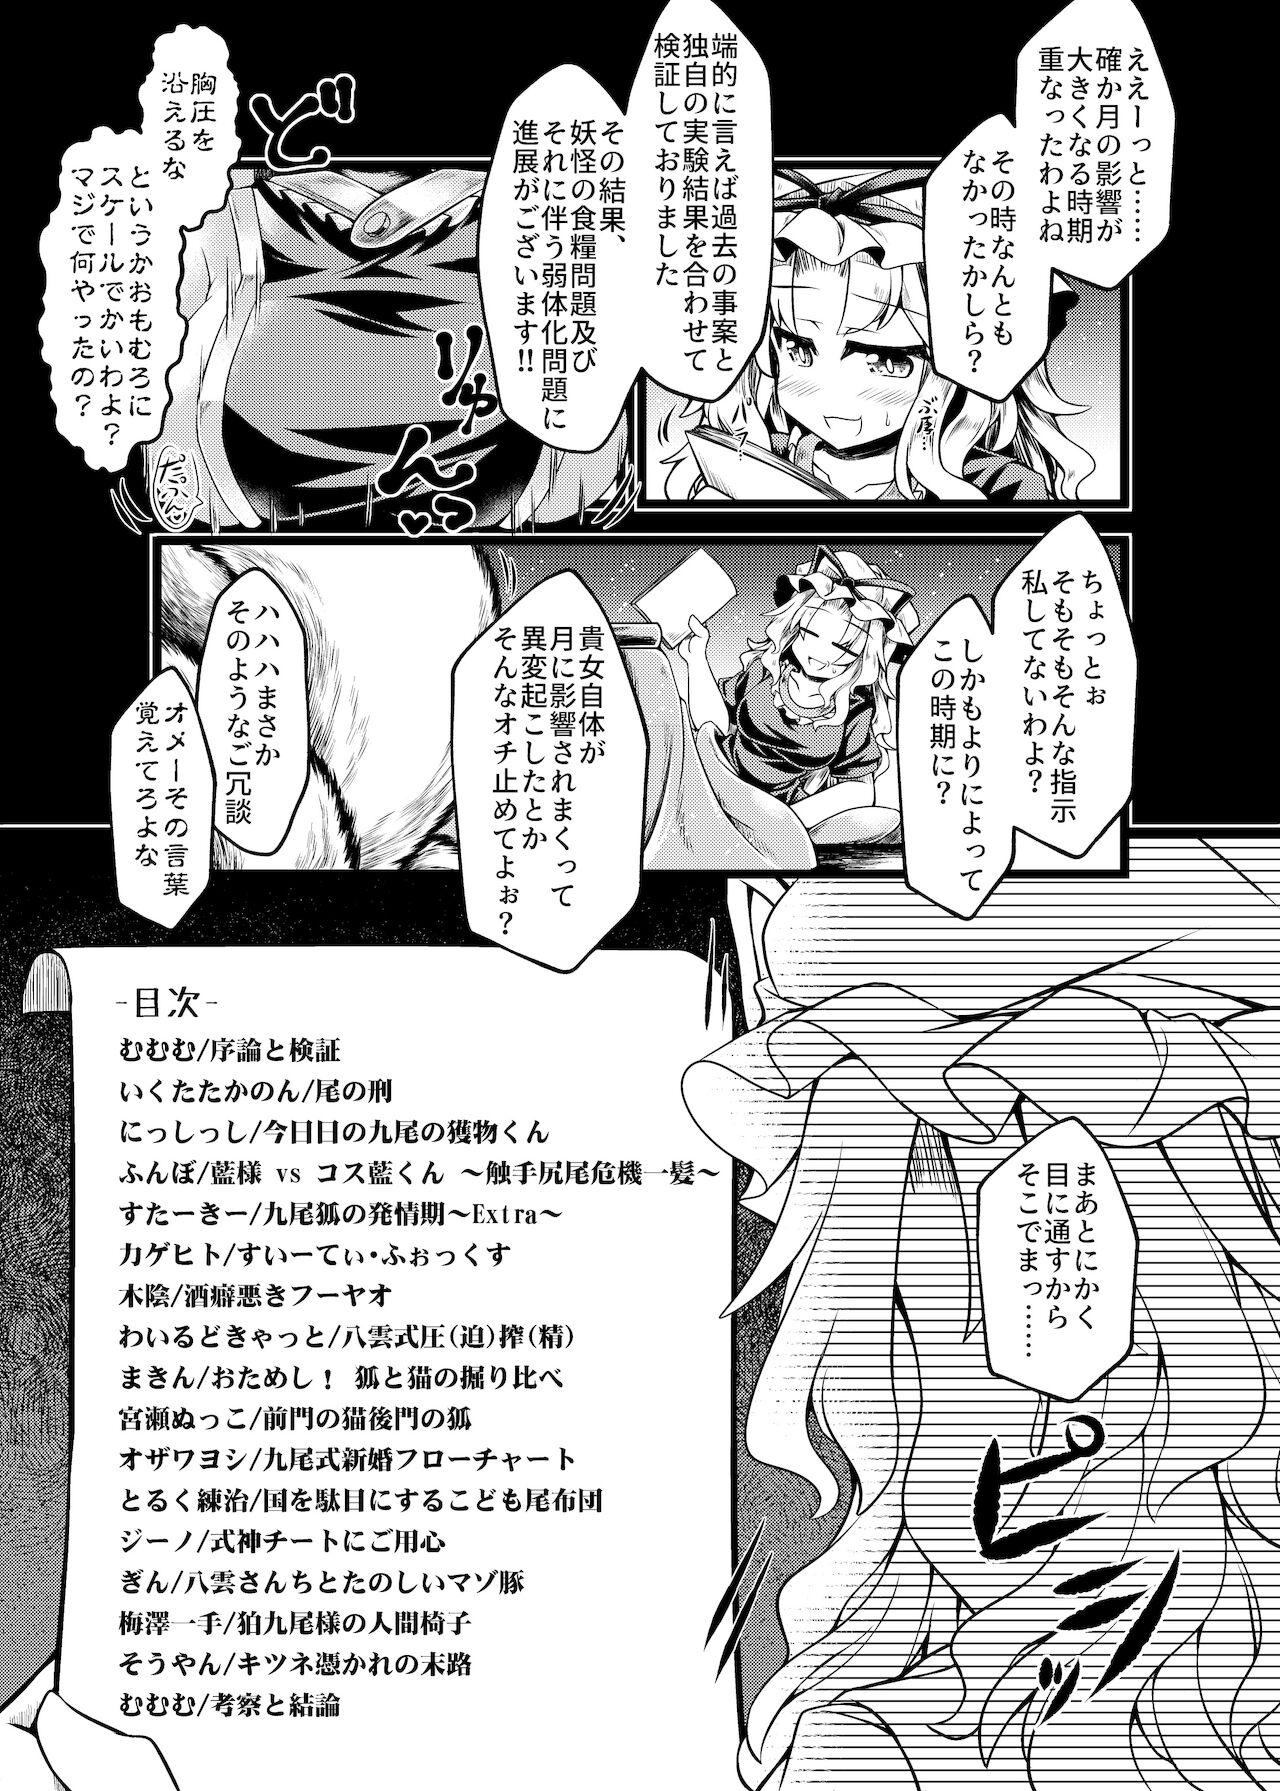 Youth Porn 嫐九尾の搾精報告 - Touhou project Teen Sex - Page 5